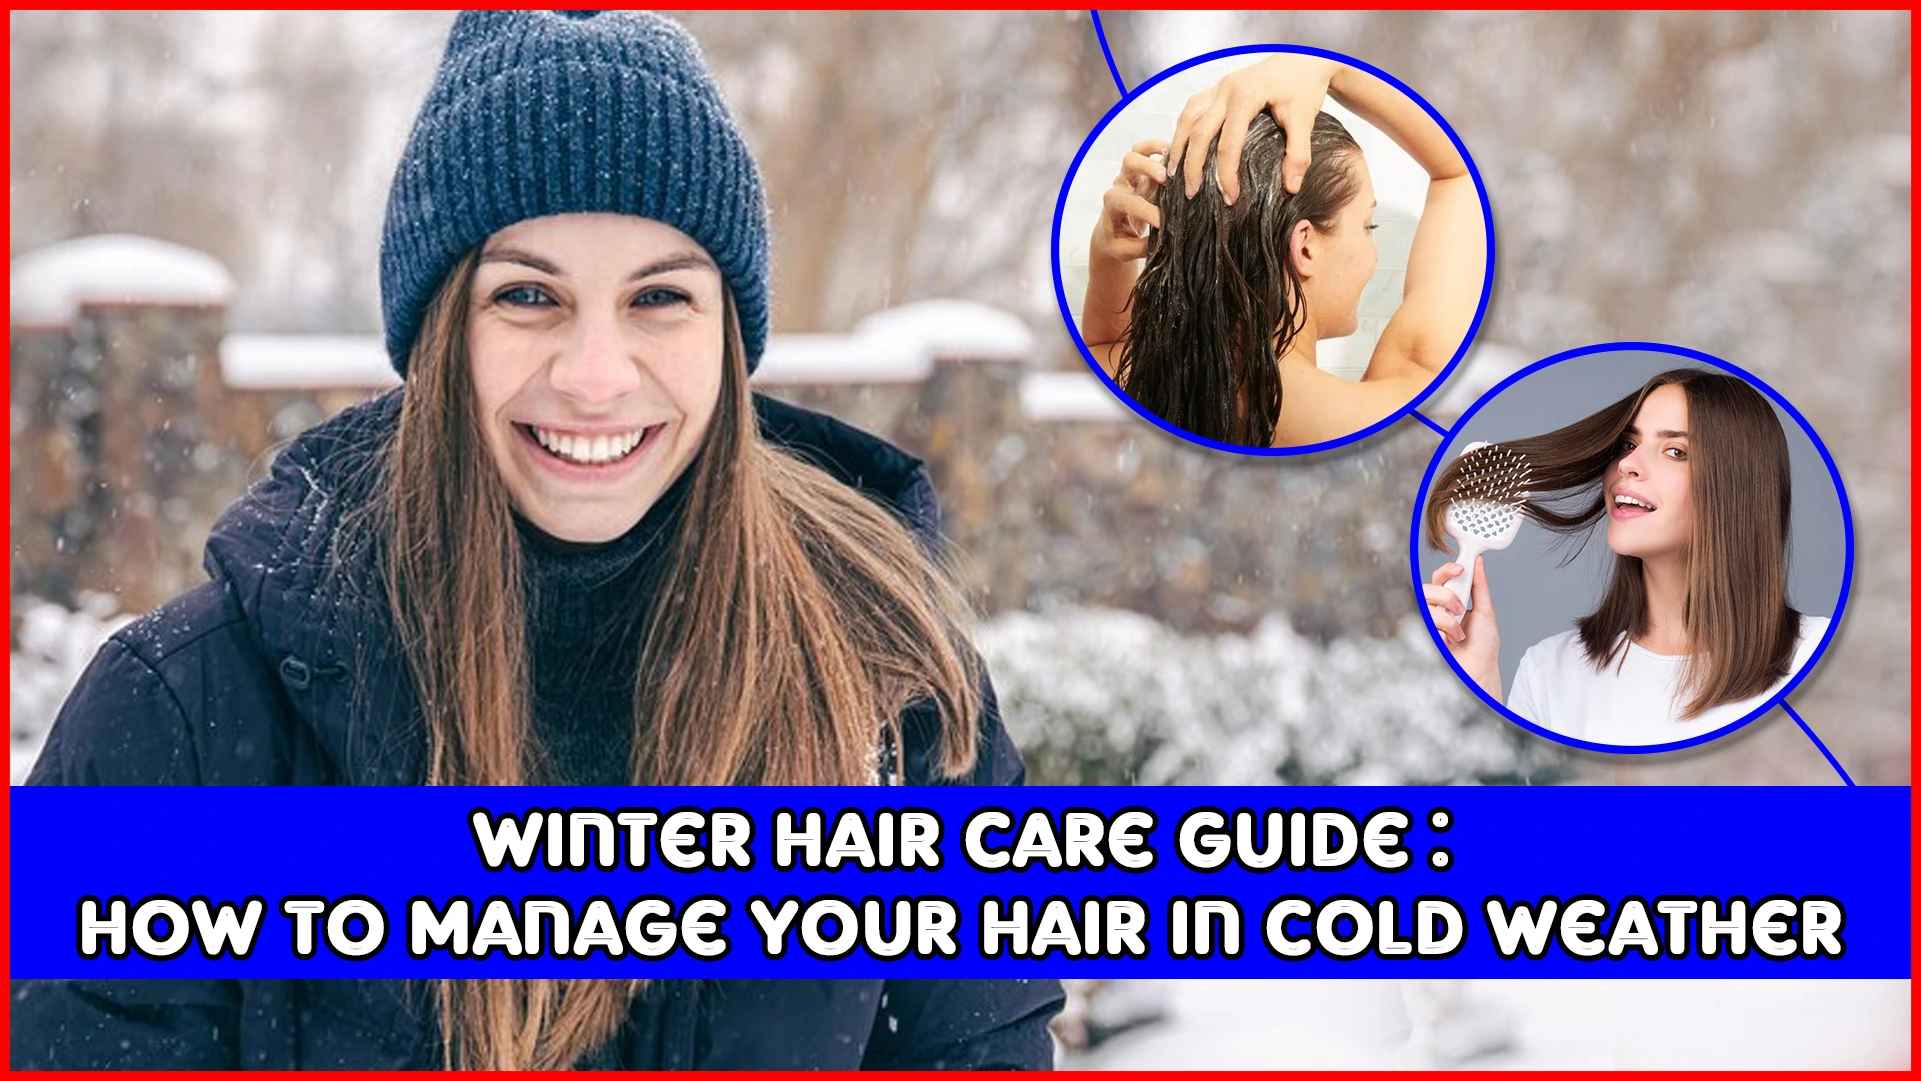 Winter hair care guide: How to manage your hair in cold weather